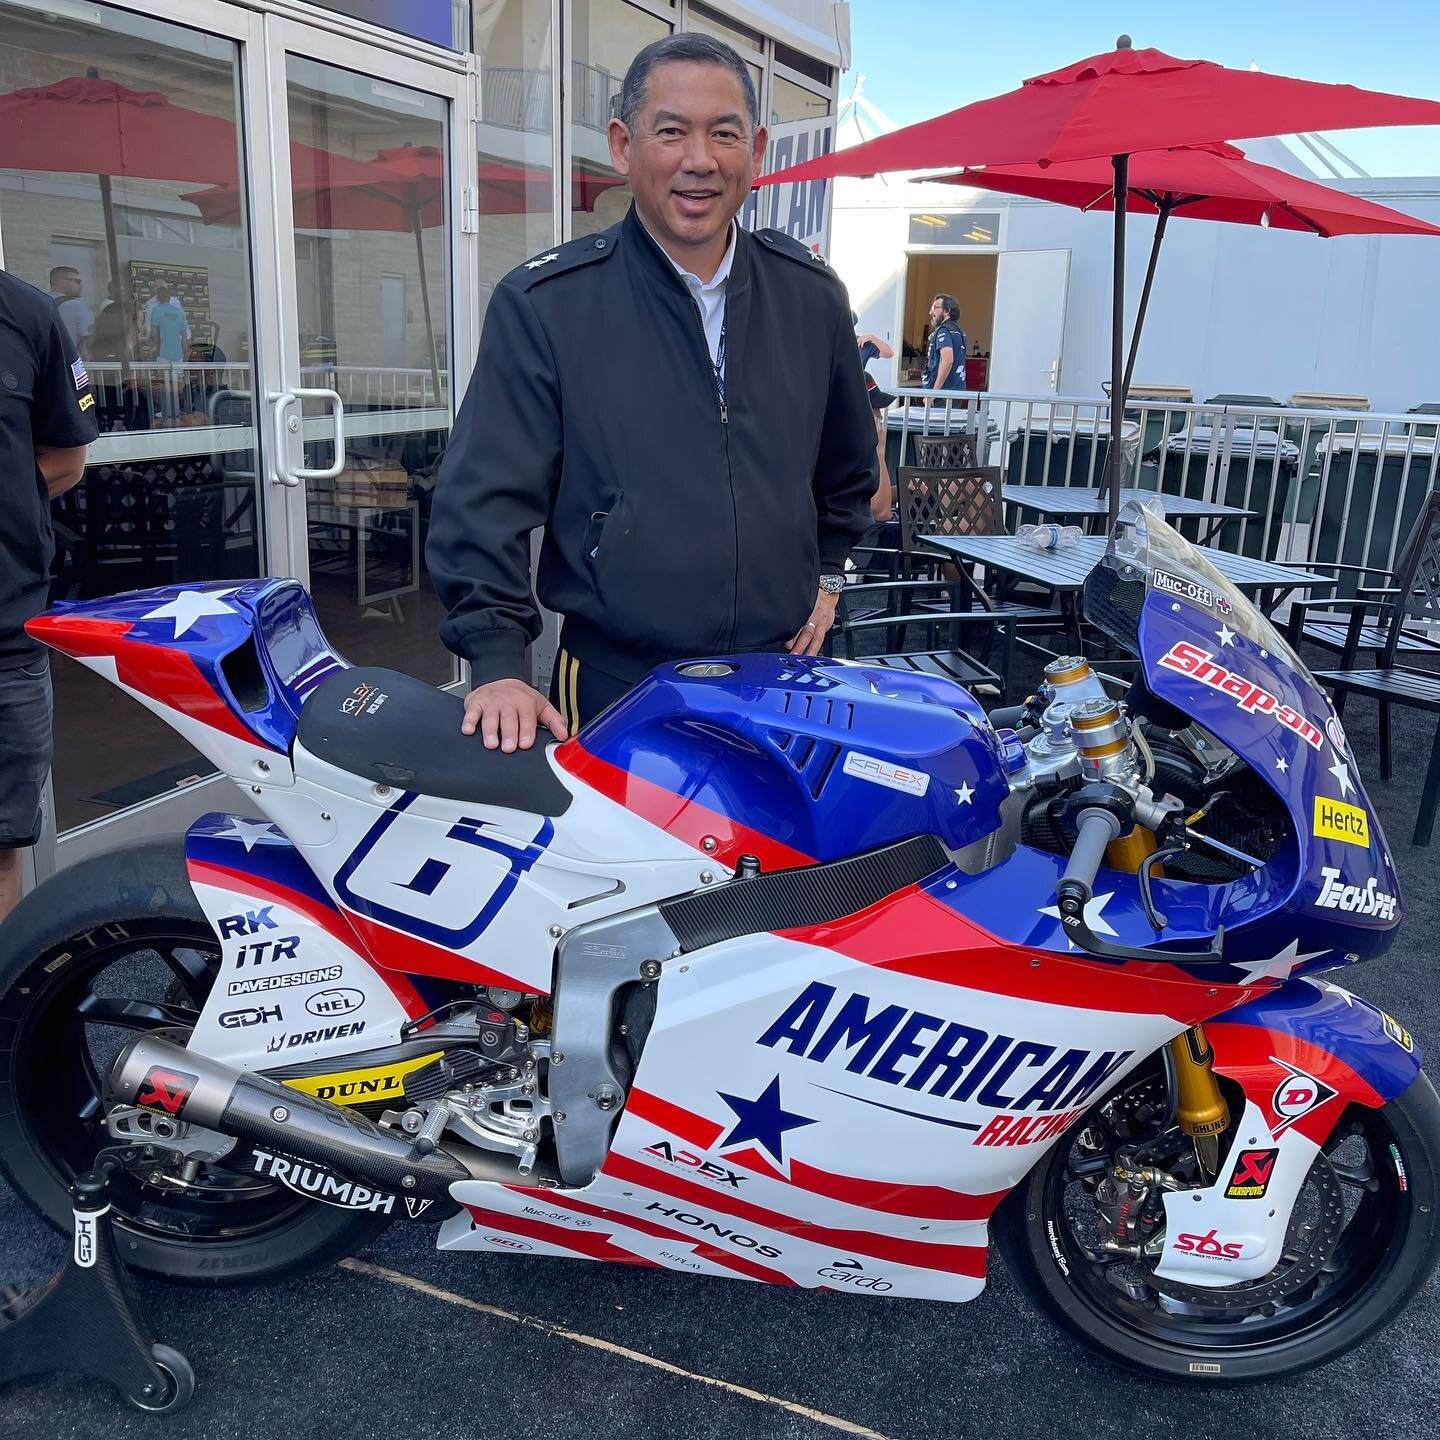 It was an absolute honor to have Army Major General Garrett Yee and Ms. Shanda-Monique Barnes in-suite! MG Yee was the military dignitary and Ms. Barnes sang the National Anthem this past weekend at #americasgp 🇺🇸 It was their FIRST MotoGP EVER and